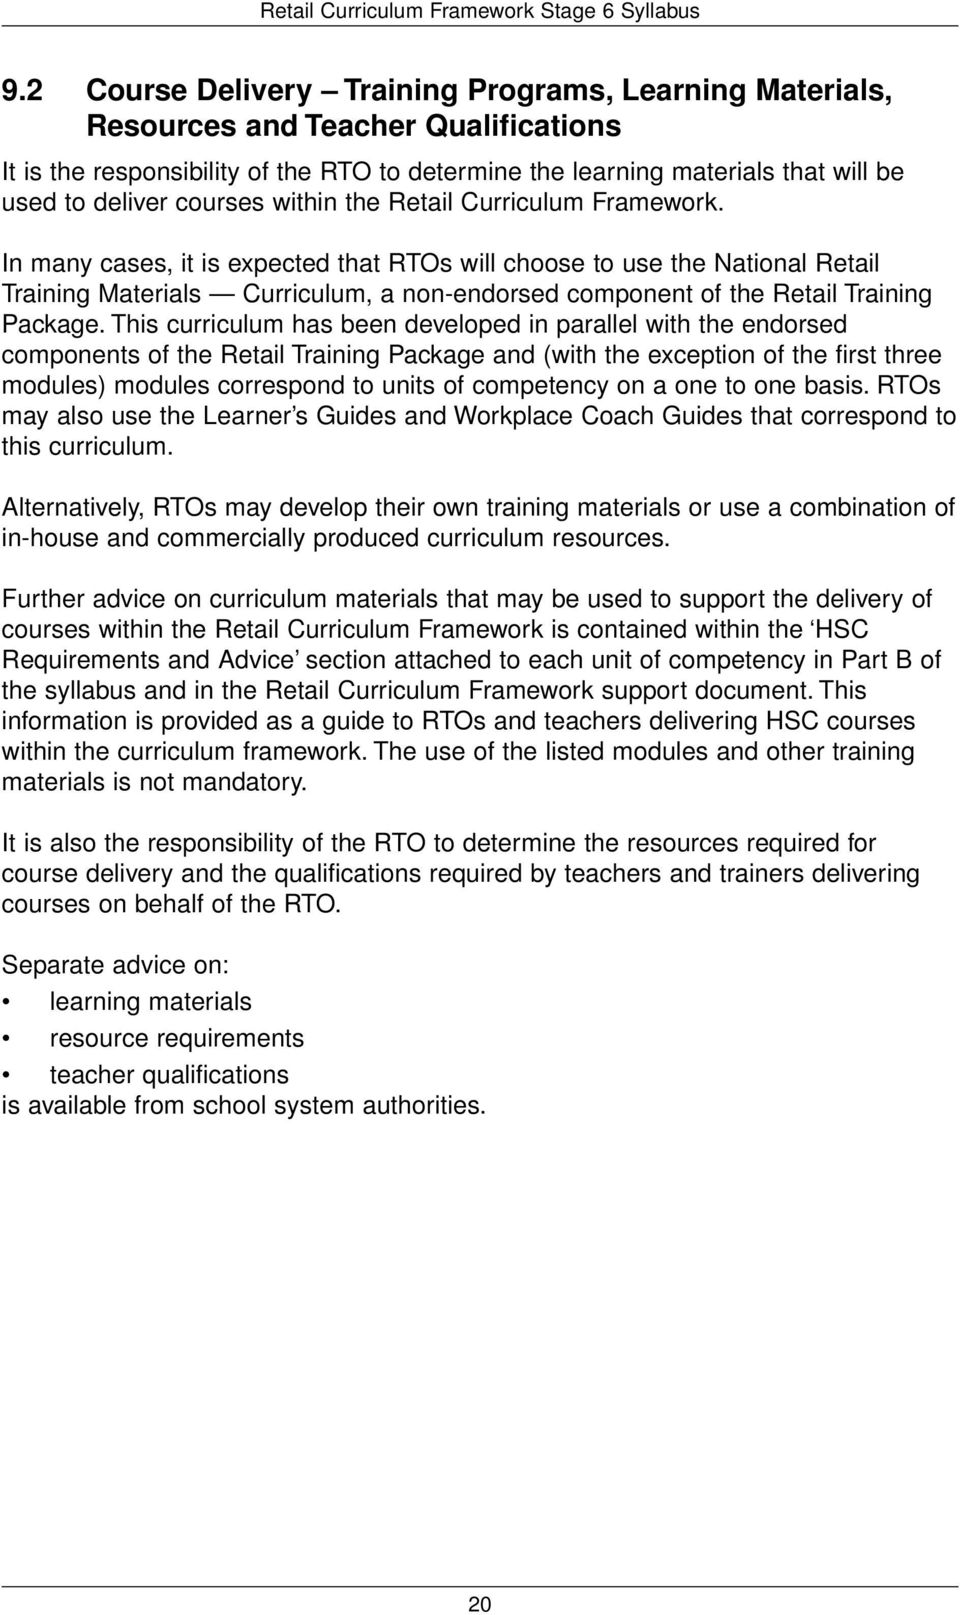 In many cases, it is expected that RTOs will choose to use the National Retail Training Materials Curriculum, a non-endorsed component of the Retail Training Package.